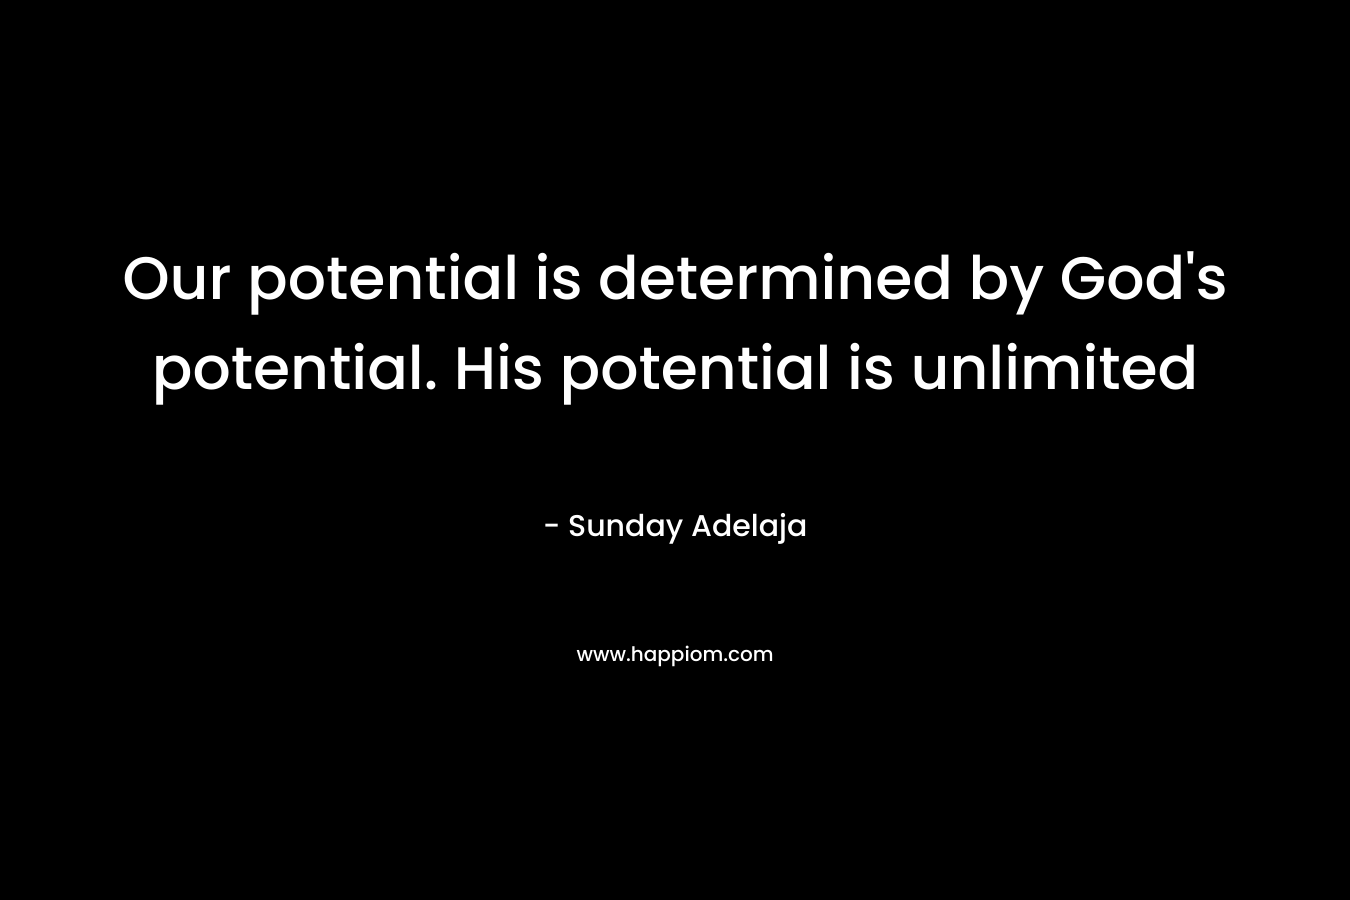 Our potential is determined by God's potential. His potential is unlimited